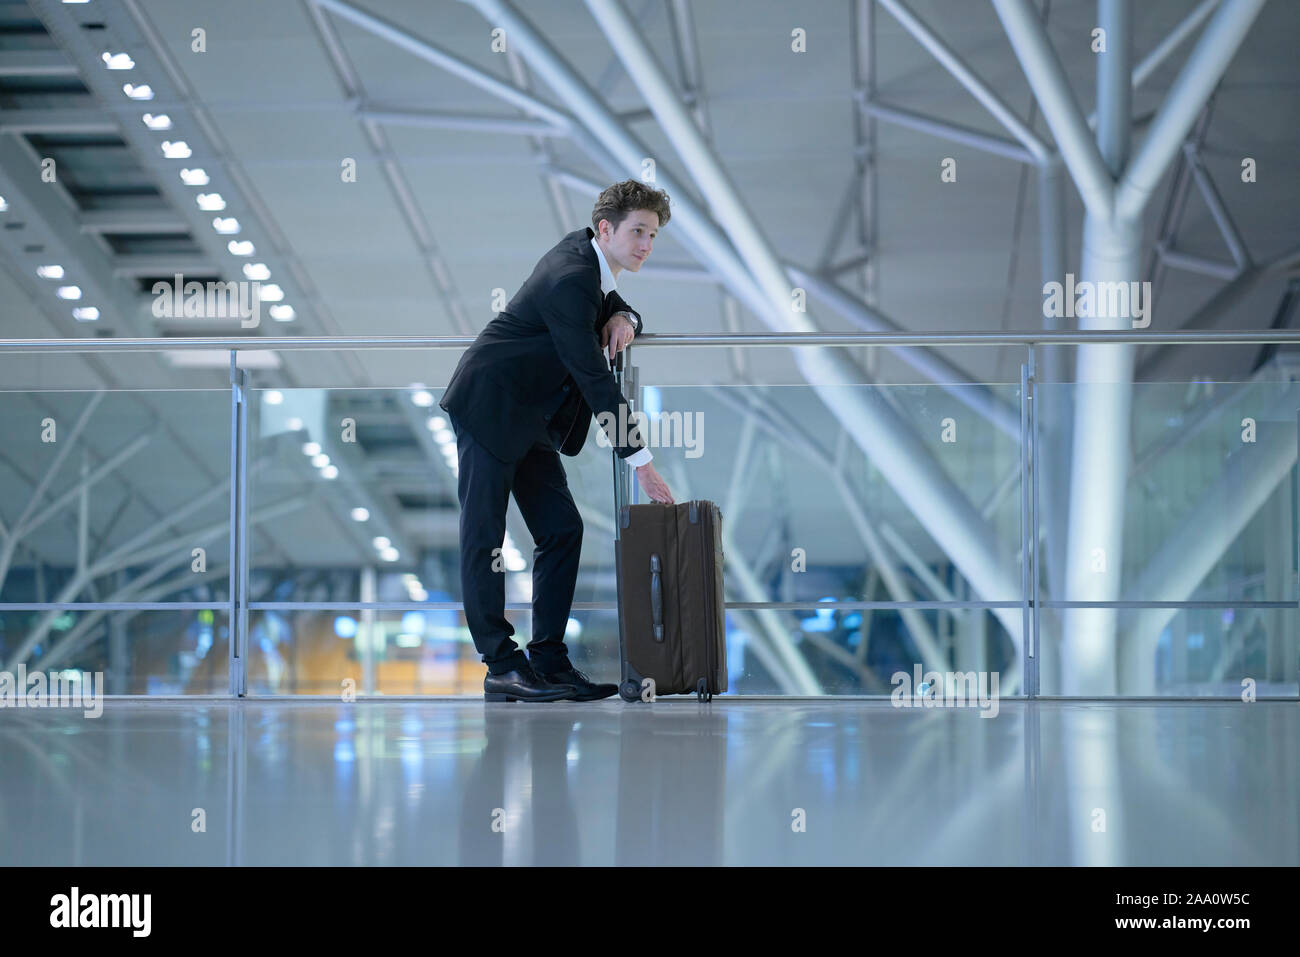 Young handsome businessman wearing a suit standing at the glass guard railing inside an airport with his hands at his rolling suitcase Stock Photo